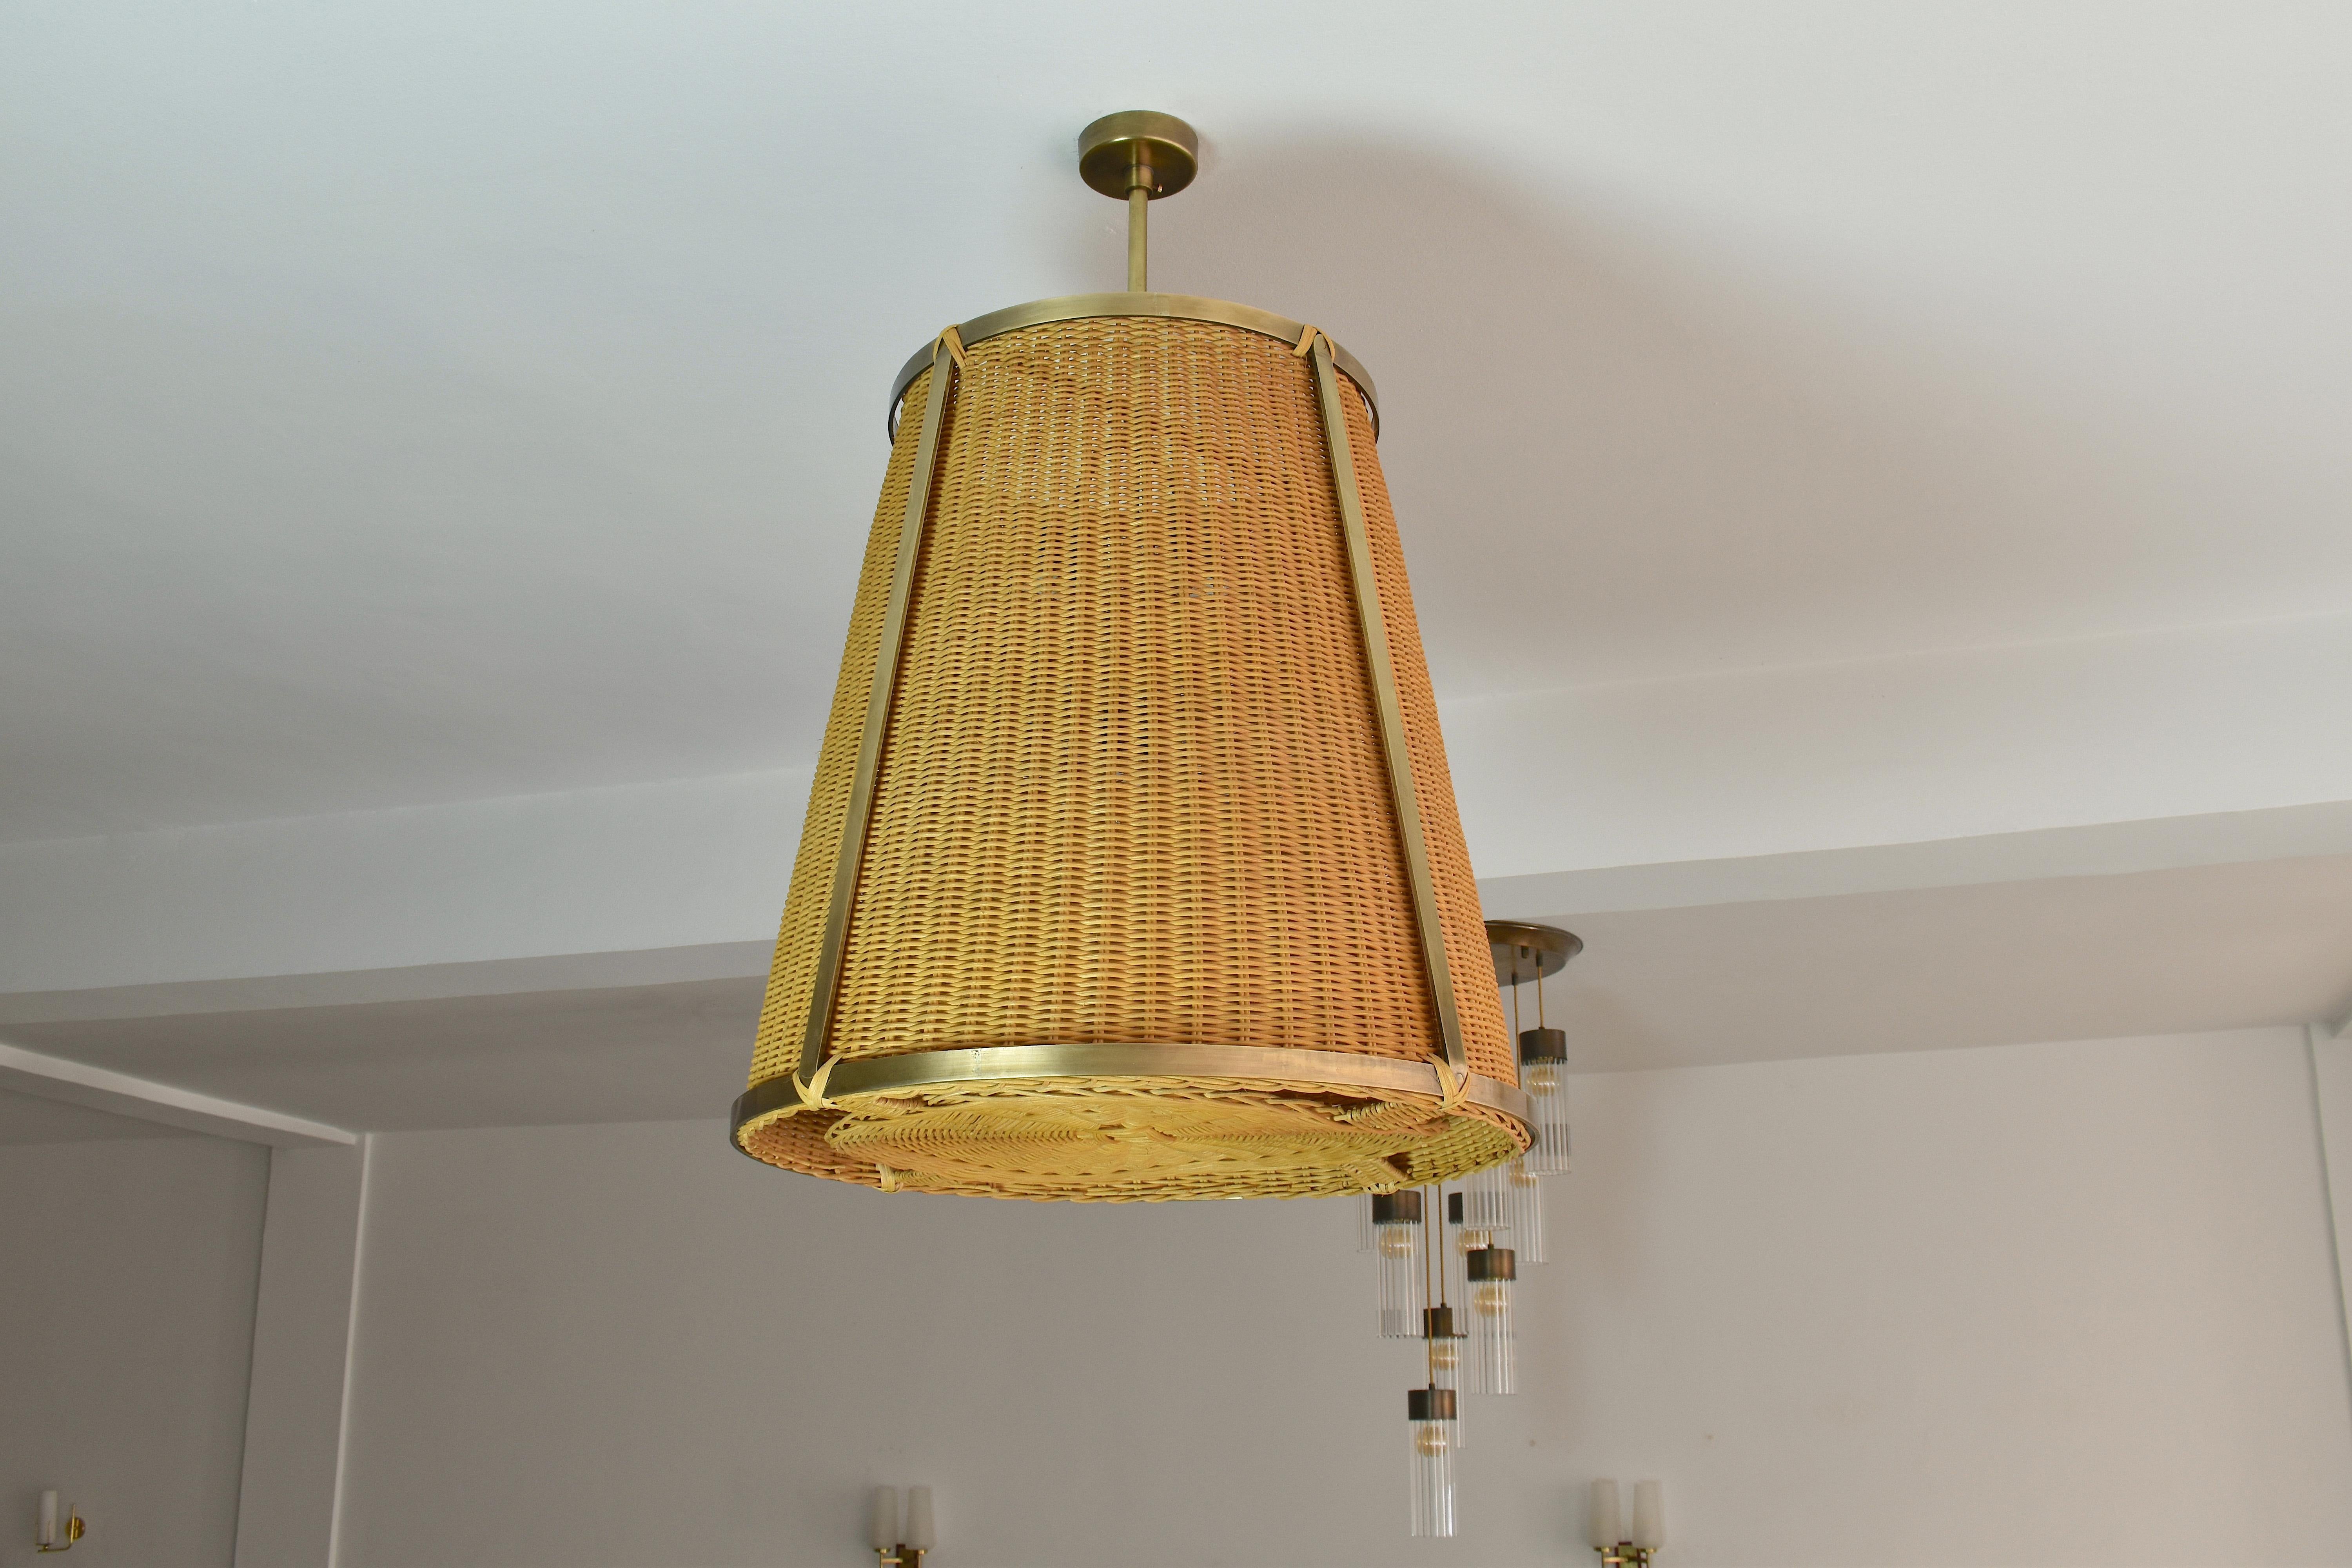 The Caeli-SD contemporary handcrafted made-to-measure pendant light fixture features an expertly handcrafted brass structure and a hand-woven dark-tinted rattan shade. This piece creates a warm and inviting ambiance, perfect for living areas or